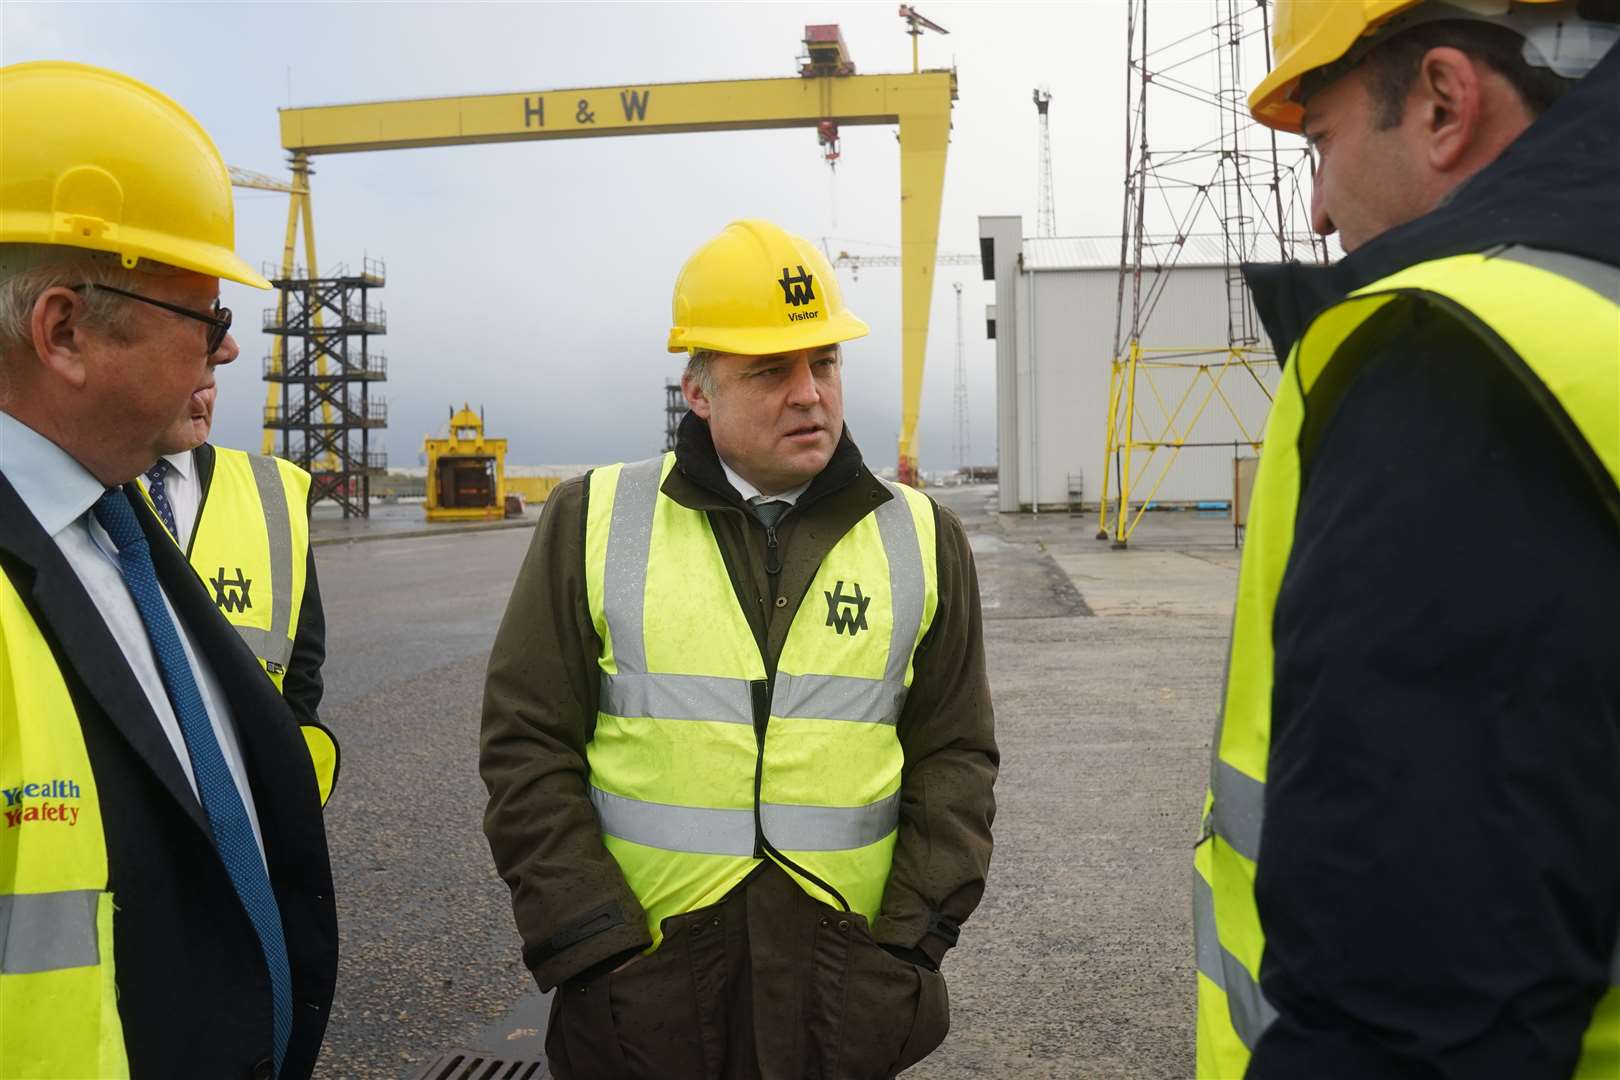 Defence Secretary Ben Wallace during a visit to Harland & Wolff shipyard factory in Belfast. (Brian Lawless/PA)